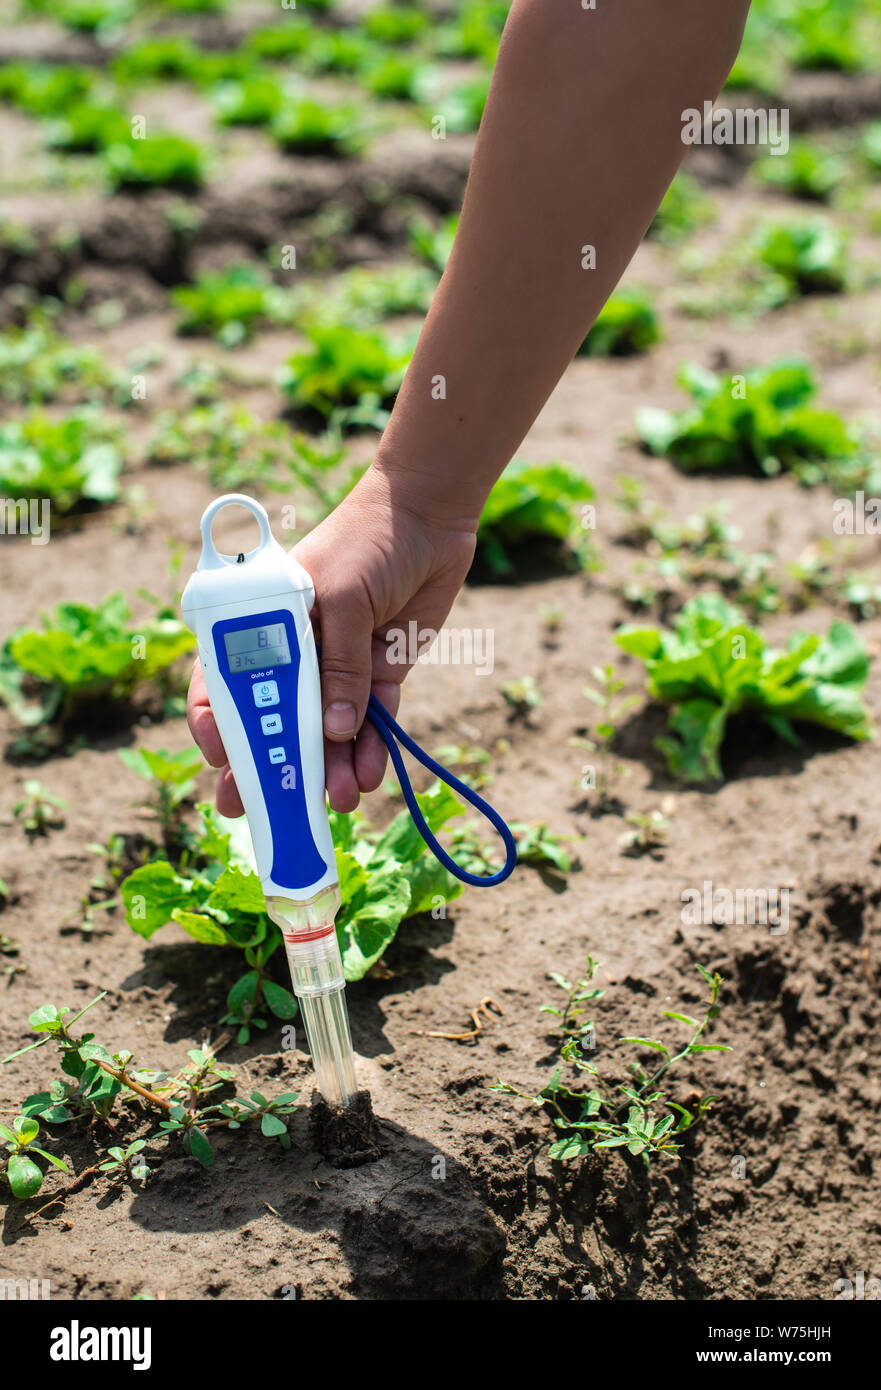 Woman use digital soil meter in the soil. Lettuce plants. Sunny day. Plant care in agriculture concept. Stock Photo